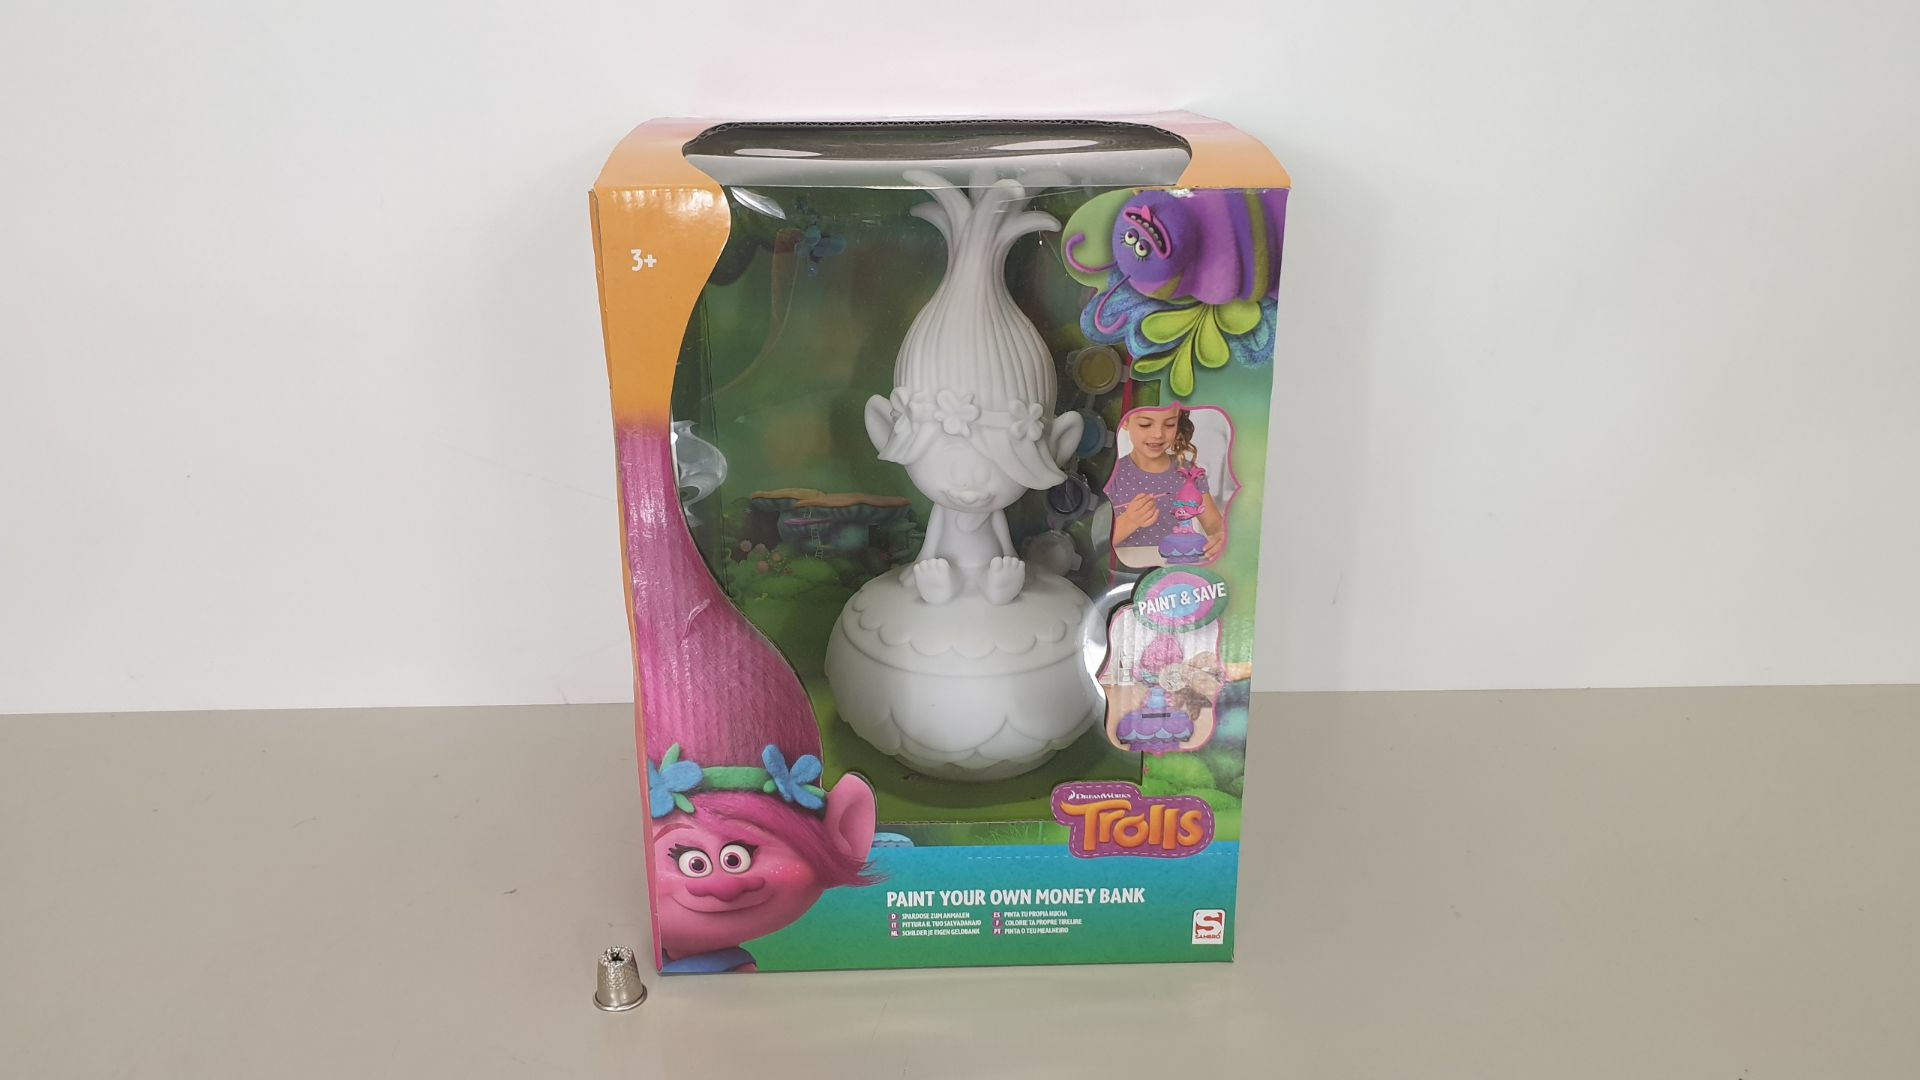 48 X BRAND NEW TROLLS PAINT YOUR OWN MONEY BANK - INCLUDES BRUSH AND PAINT